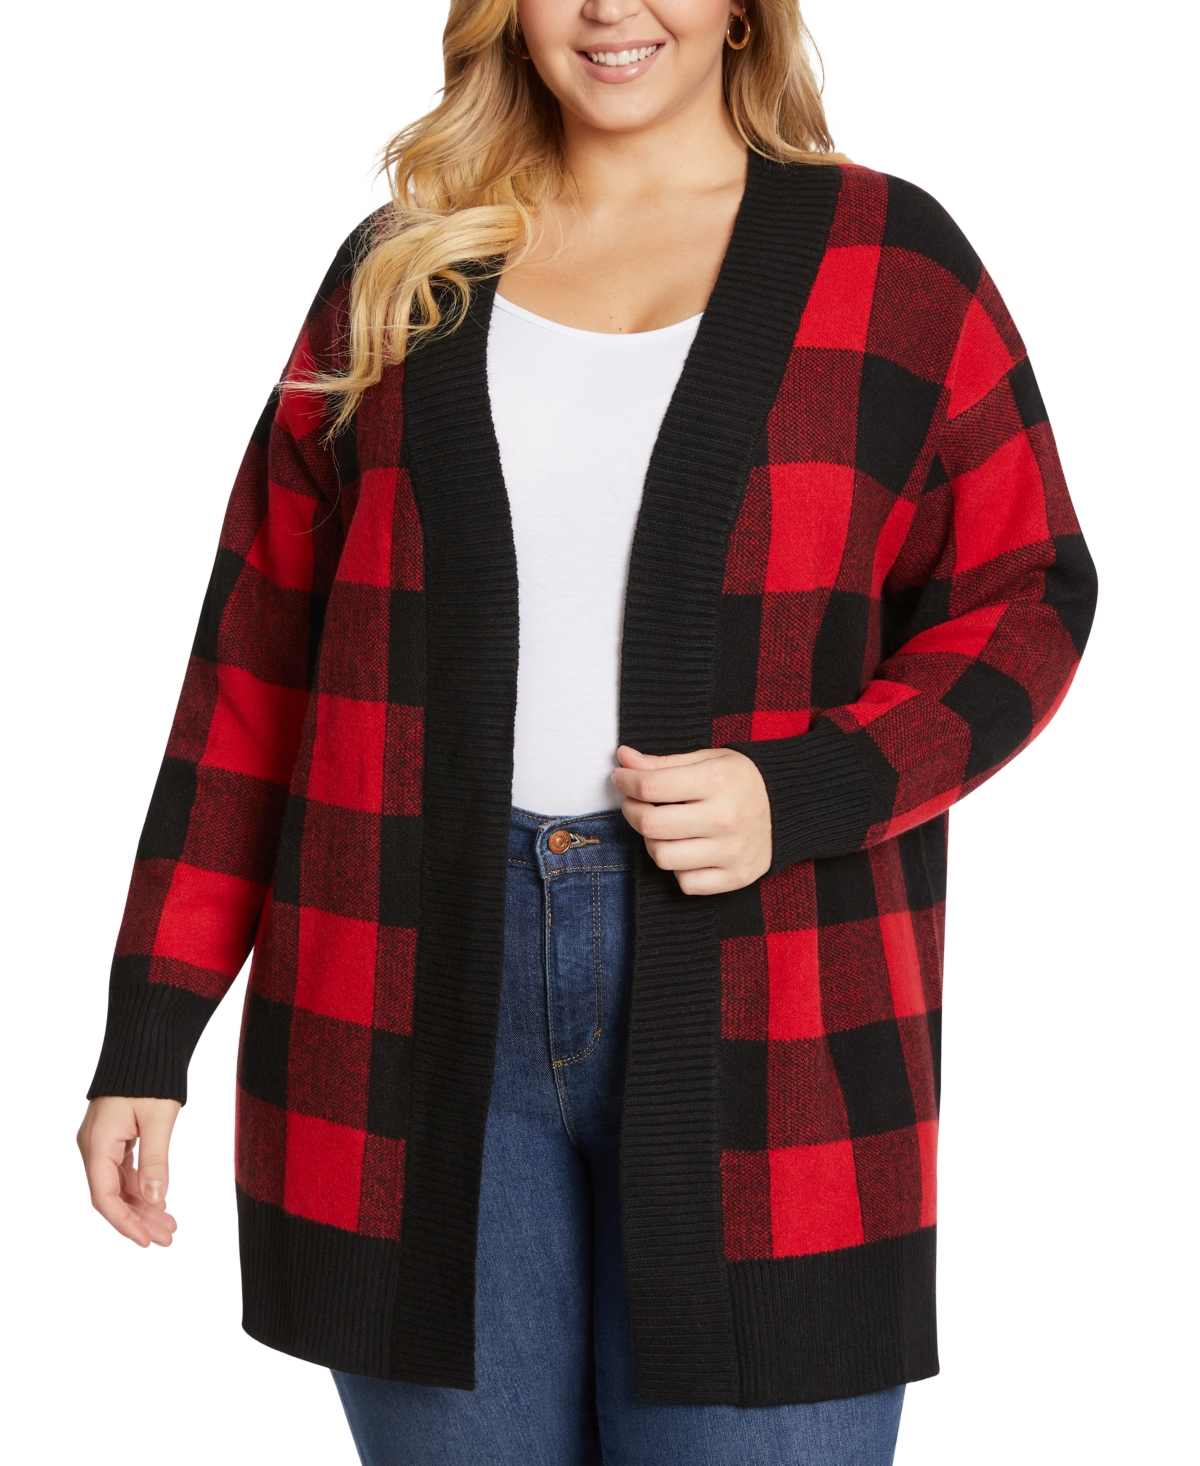 Jessica Simpson Trendy Plus Size Printed Open-front Cardigan In Claret Red Buffalo Check